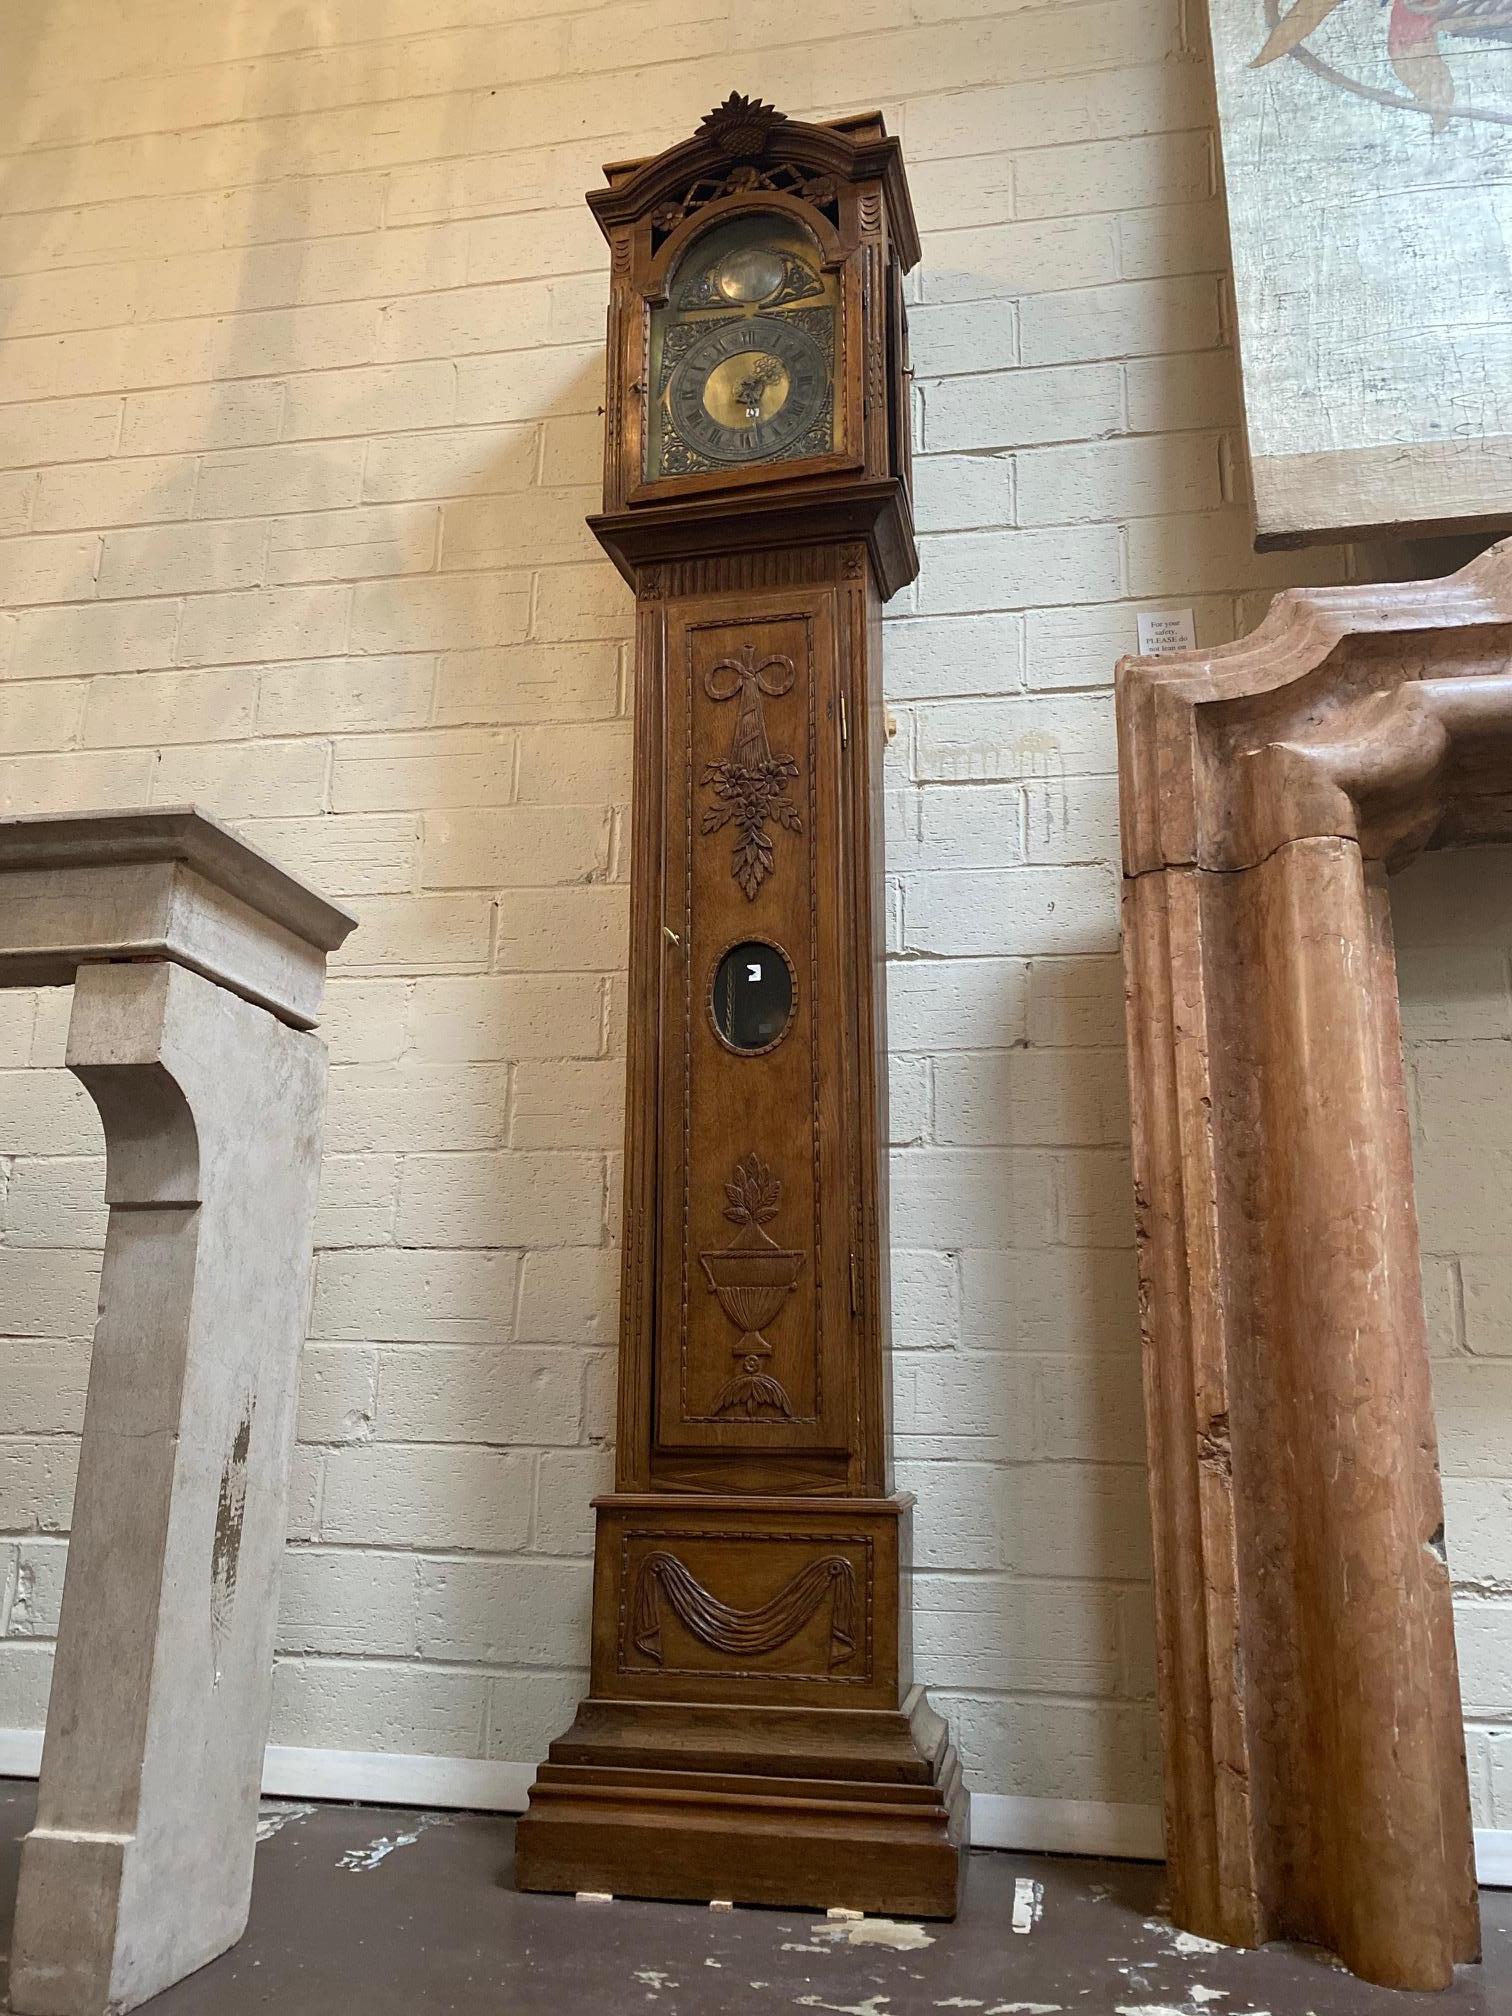 This grandfather clock originates from Belgium, circa 1850. It features a brass face with the words 